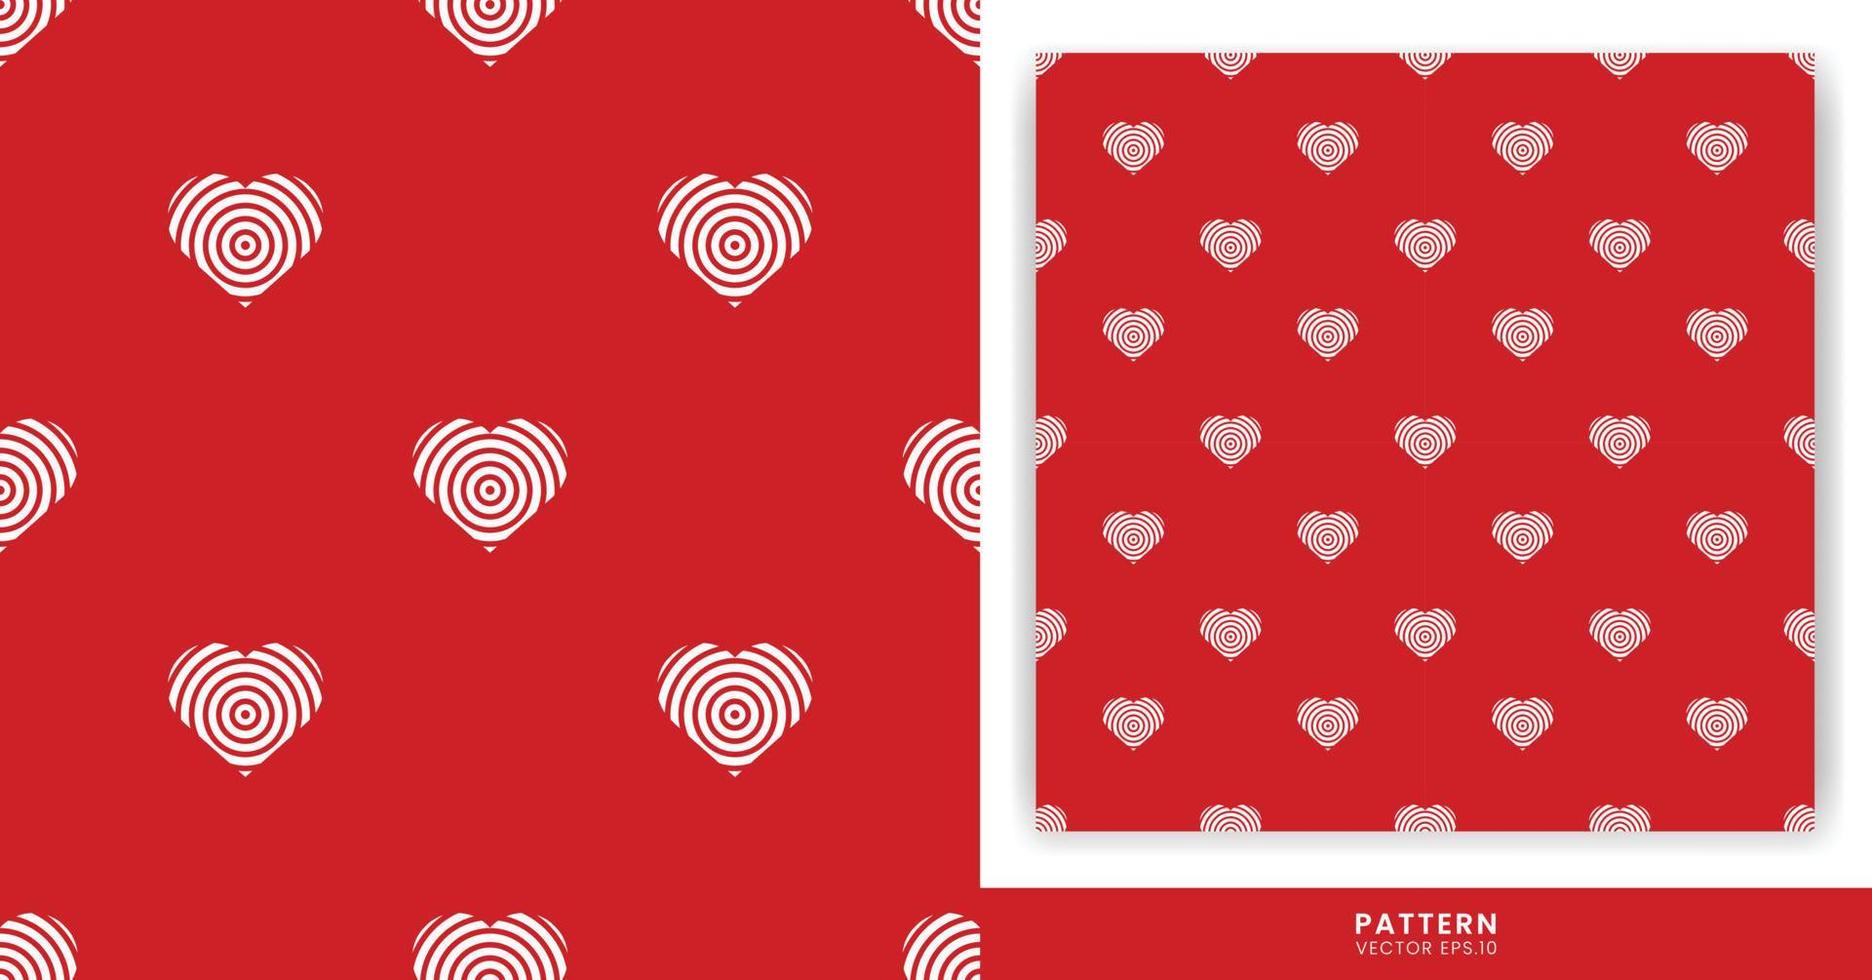 The Pattern with a Unique Heart Theme and a Red Background can be Used to Design Clothes, Books, or Other Designs. vector